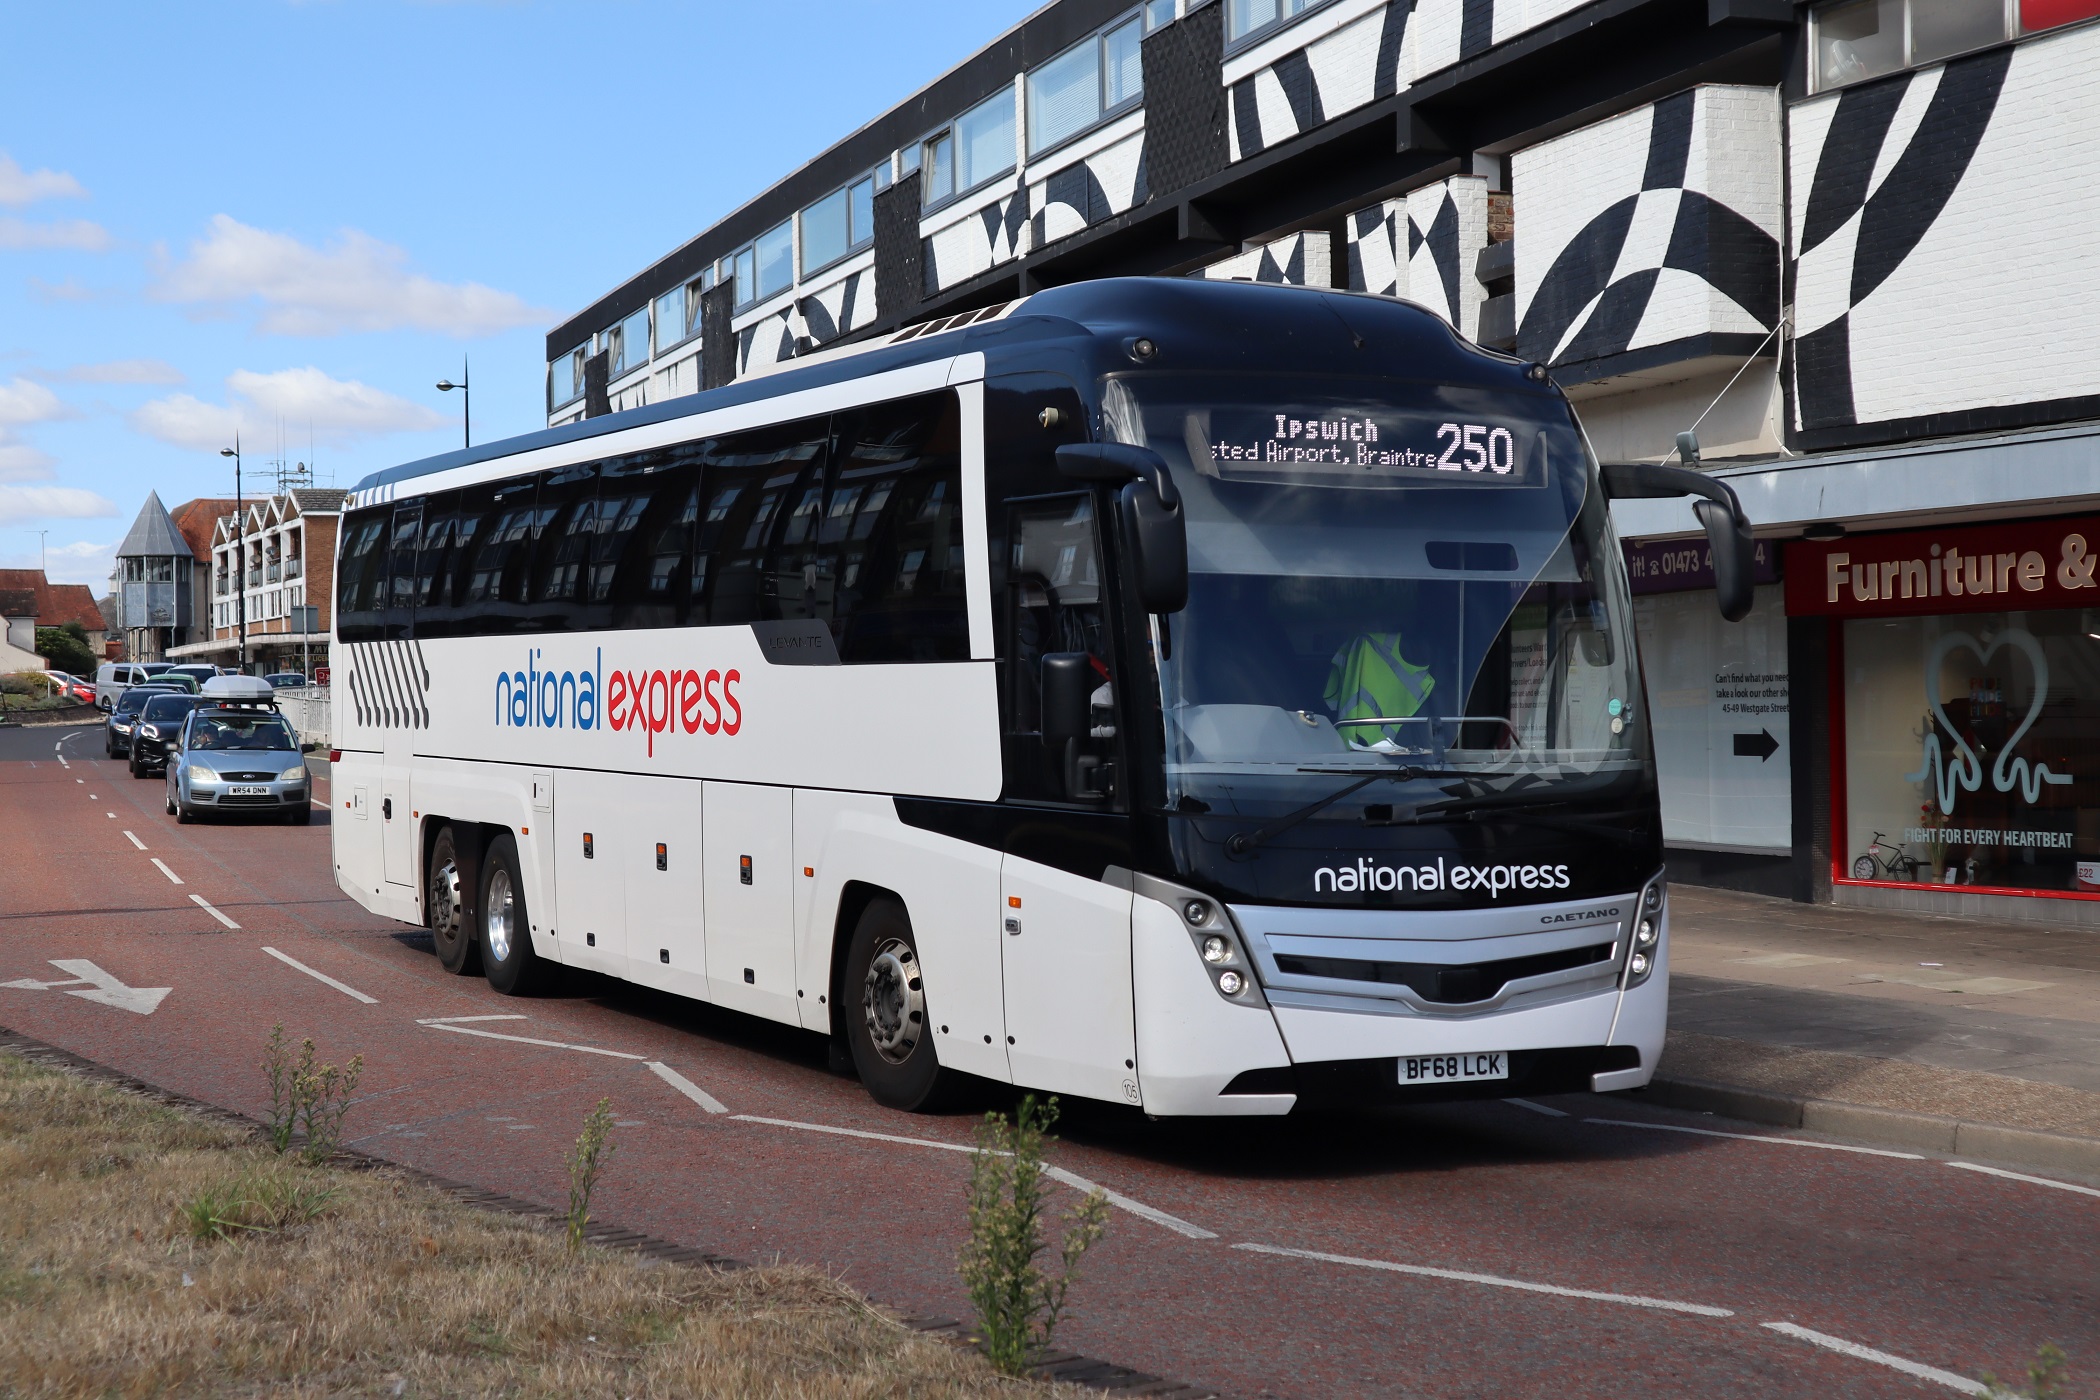 National Express increases services as scheduled coach market grows further